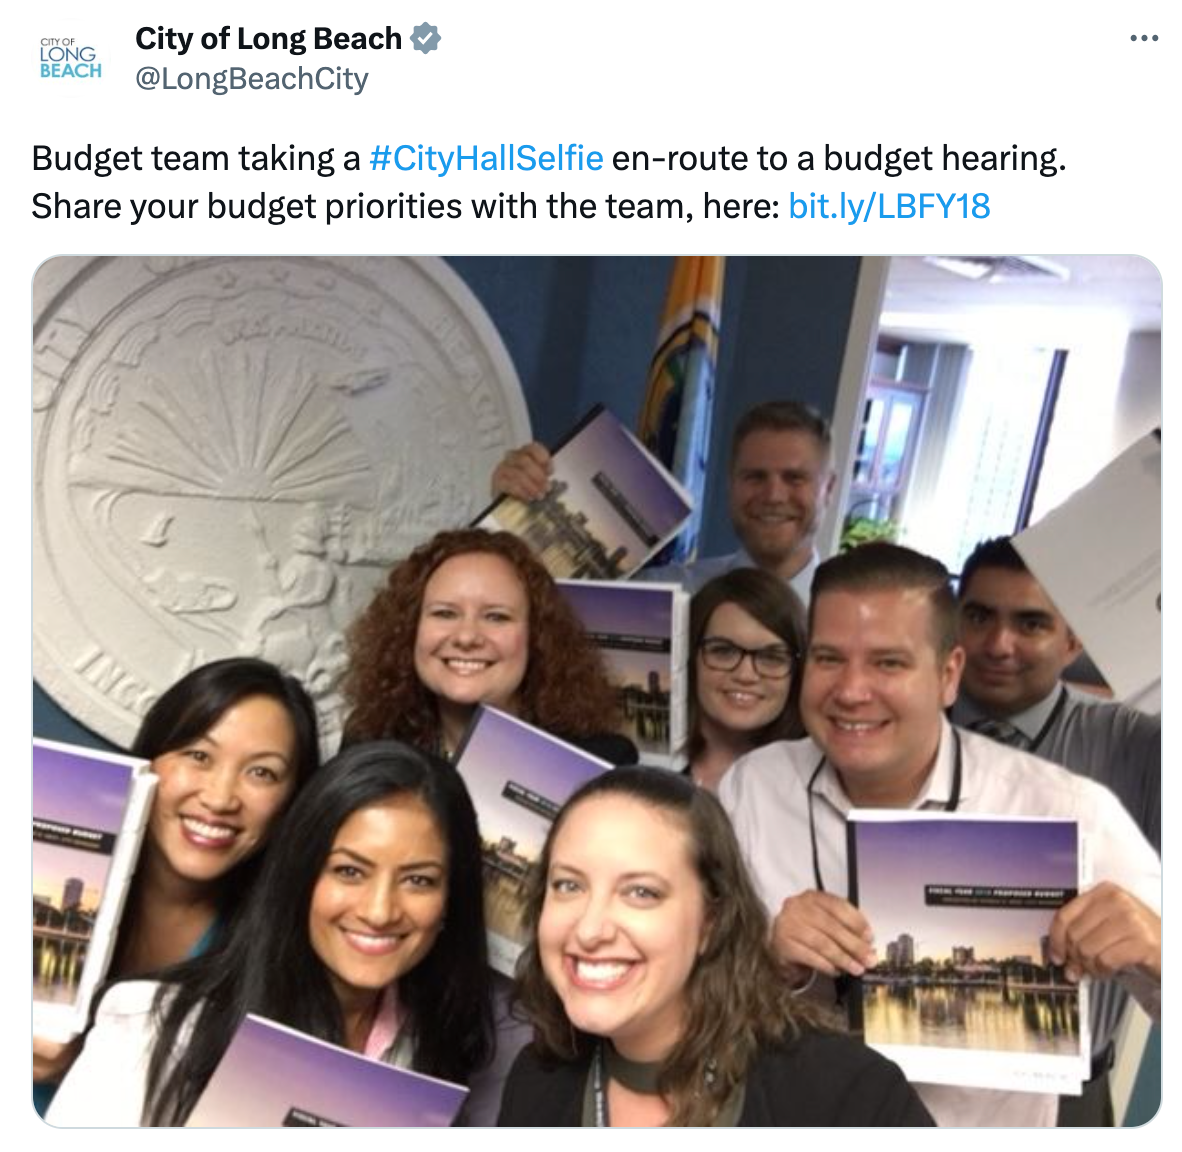 A tweet showing Long Beach, CA employees taking a City Hall Selfie en route to a budget hearing.